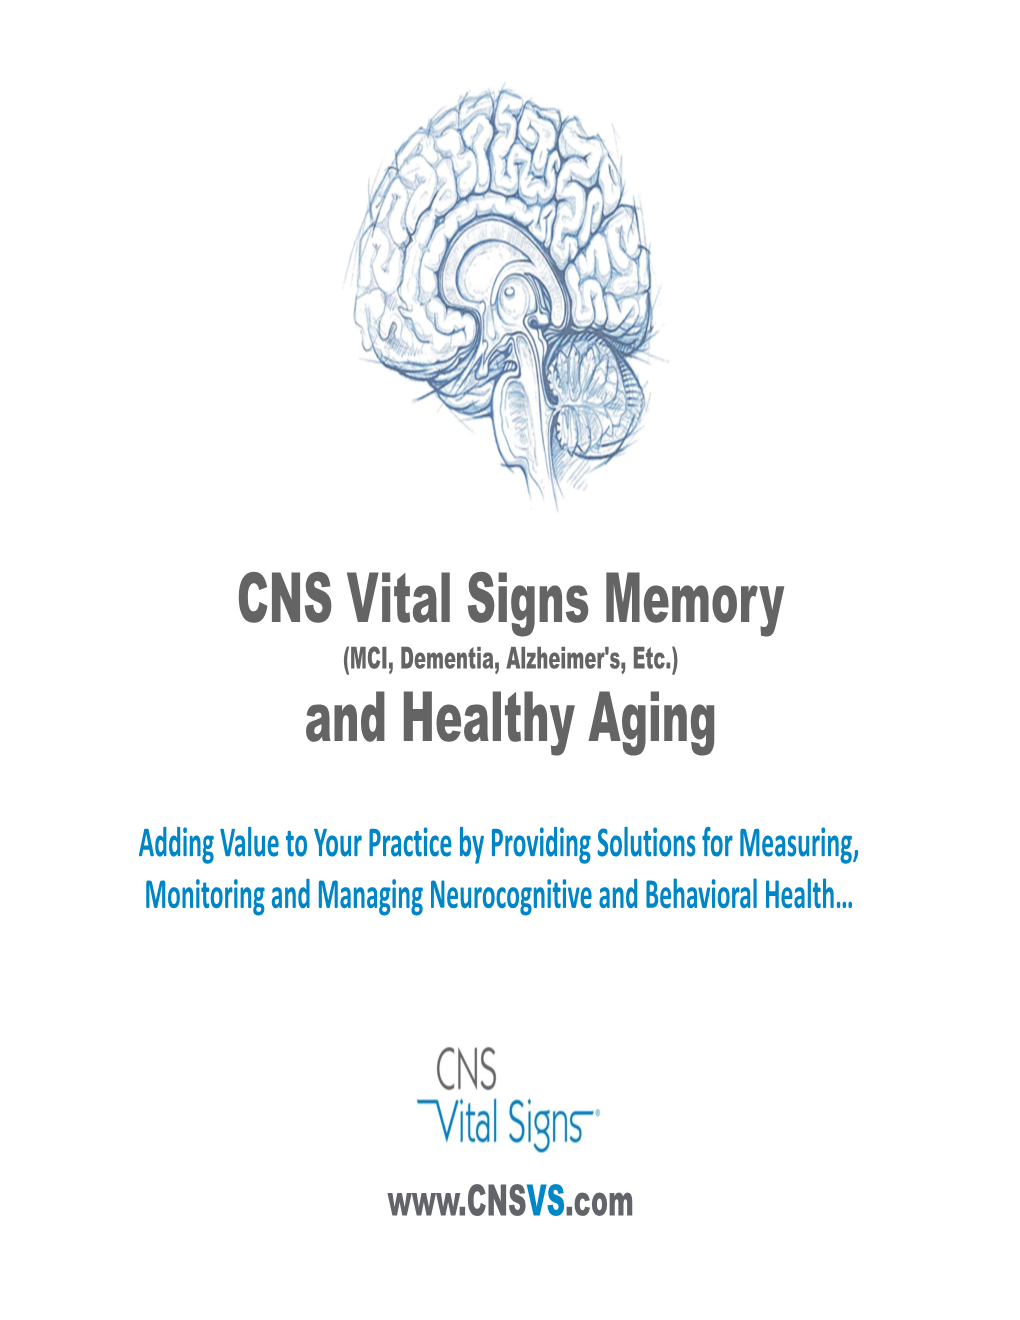 CNS Vital Signs Memory and Healthy Aging